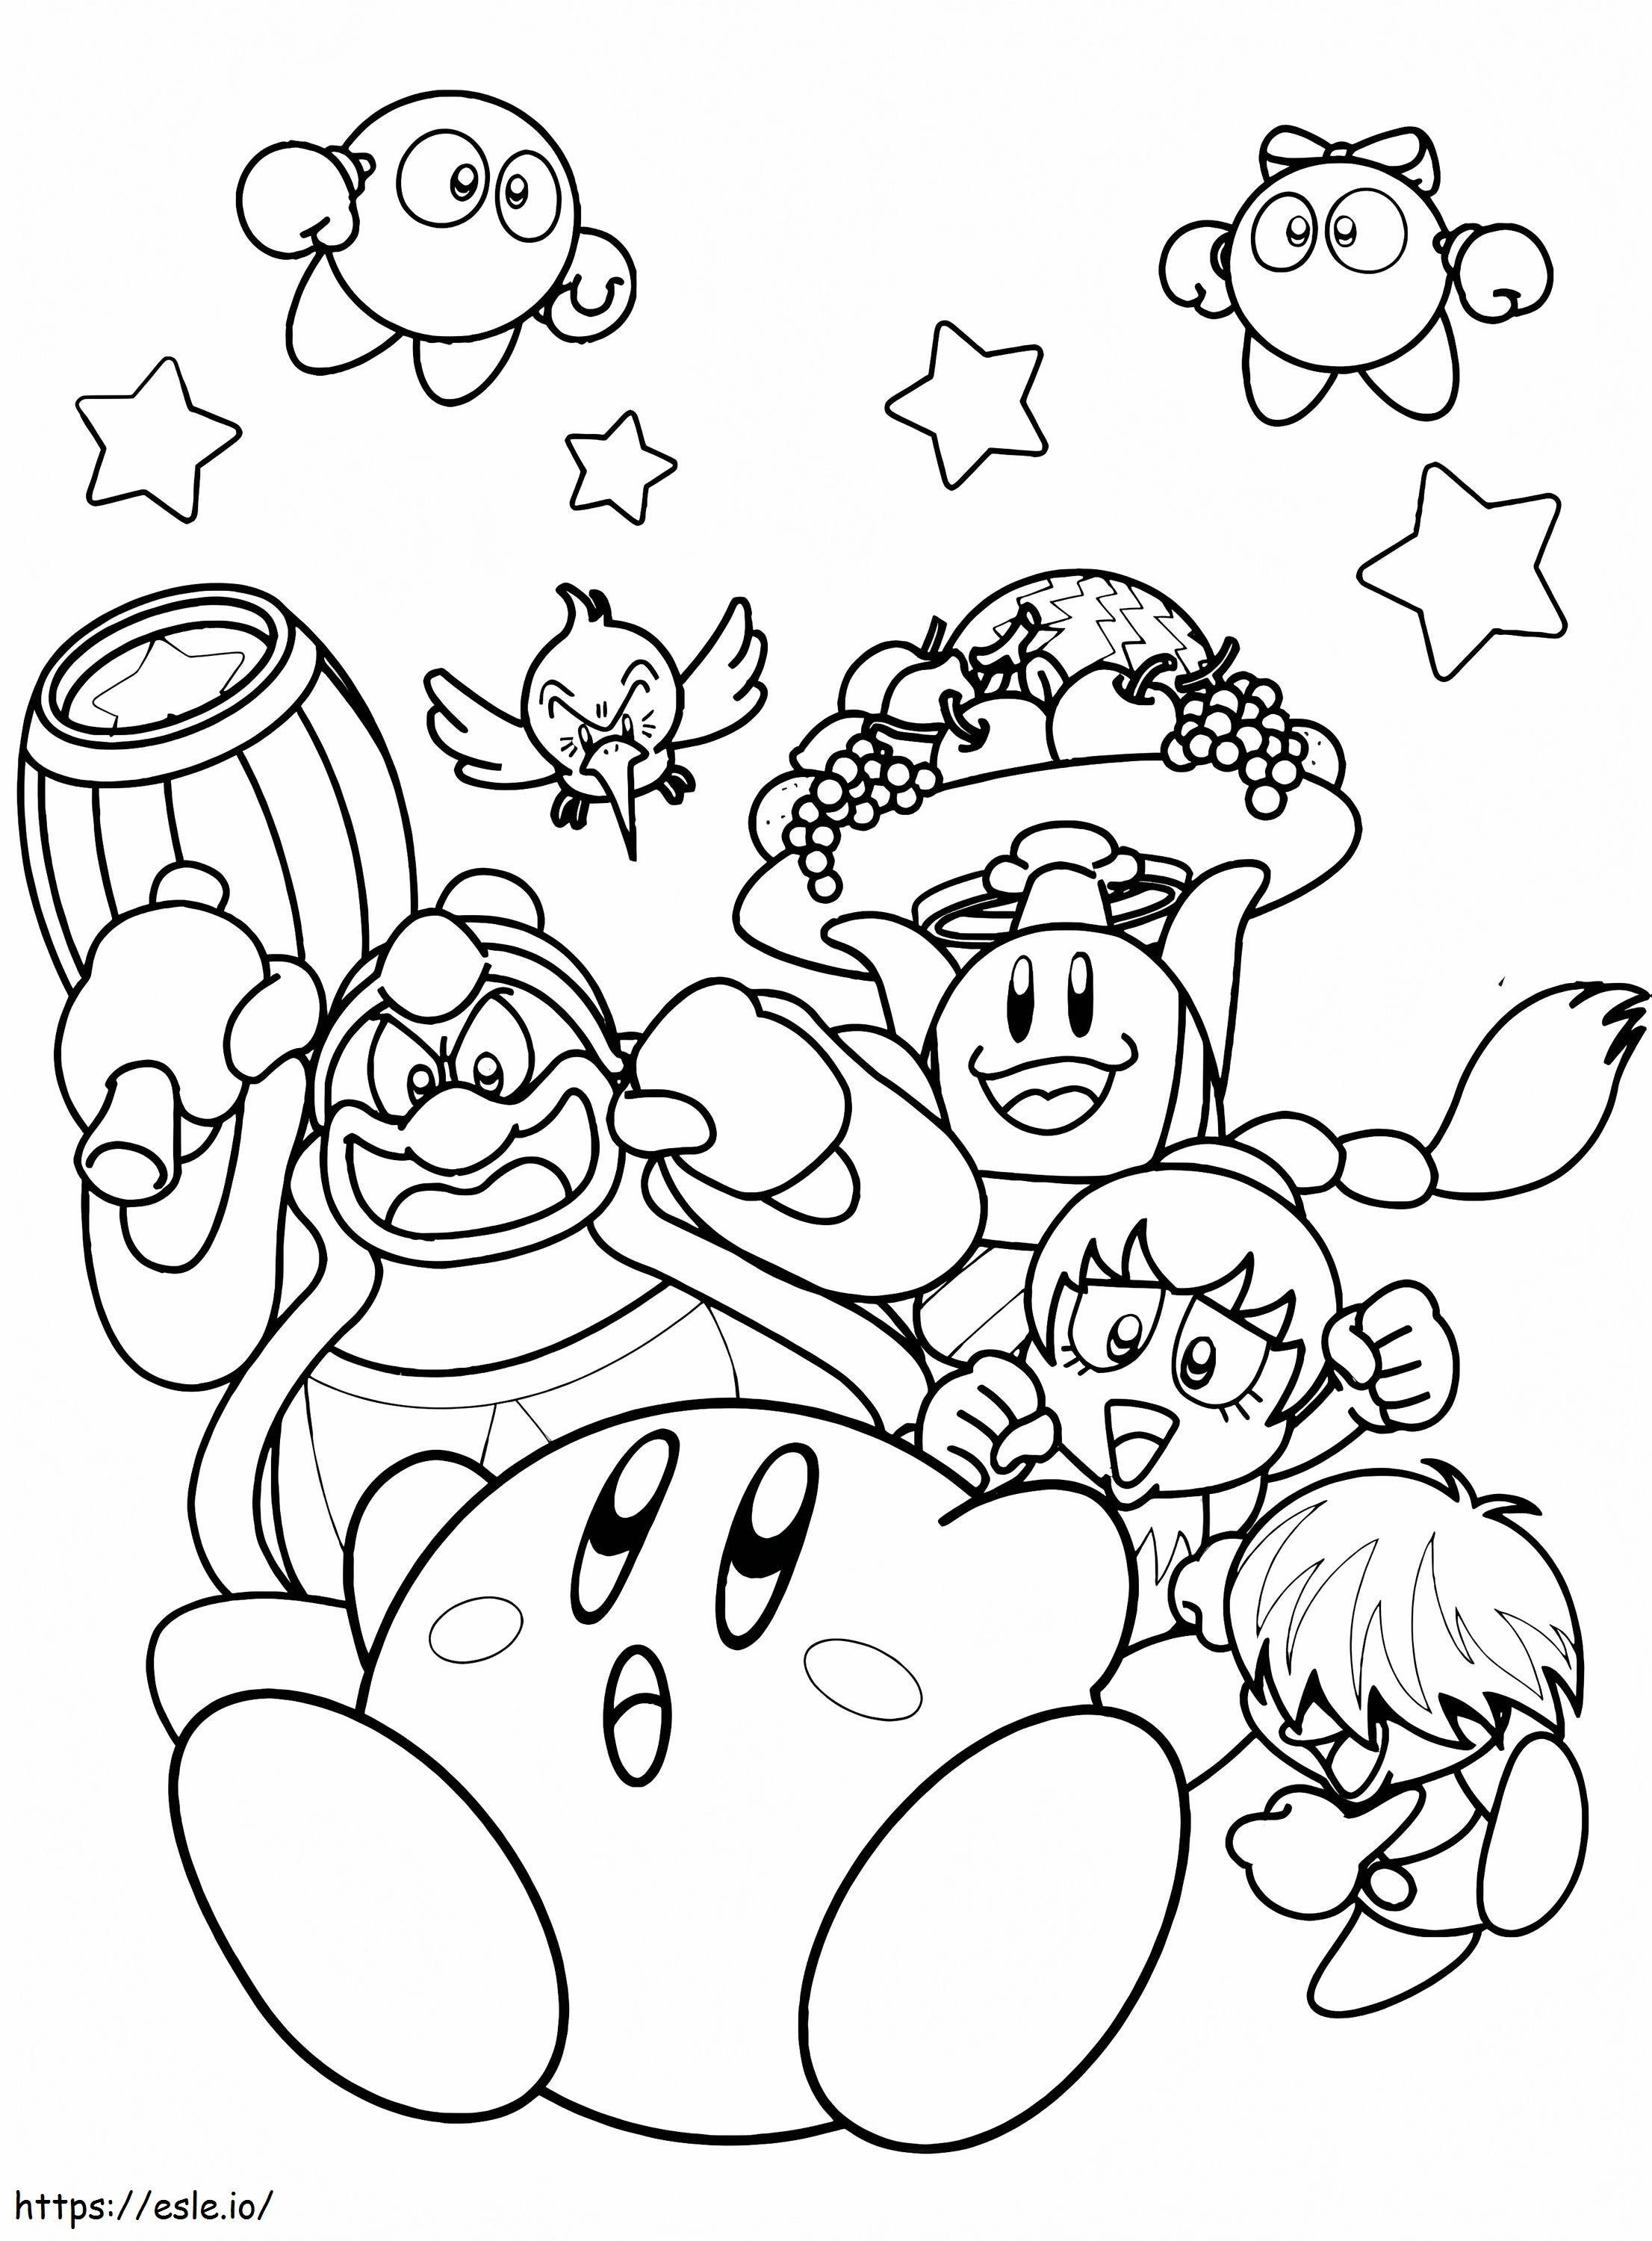 Adorable Kirby coloring page